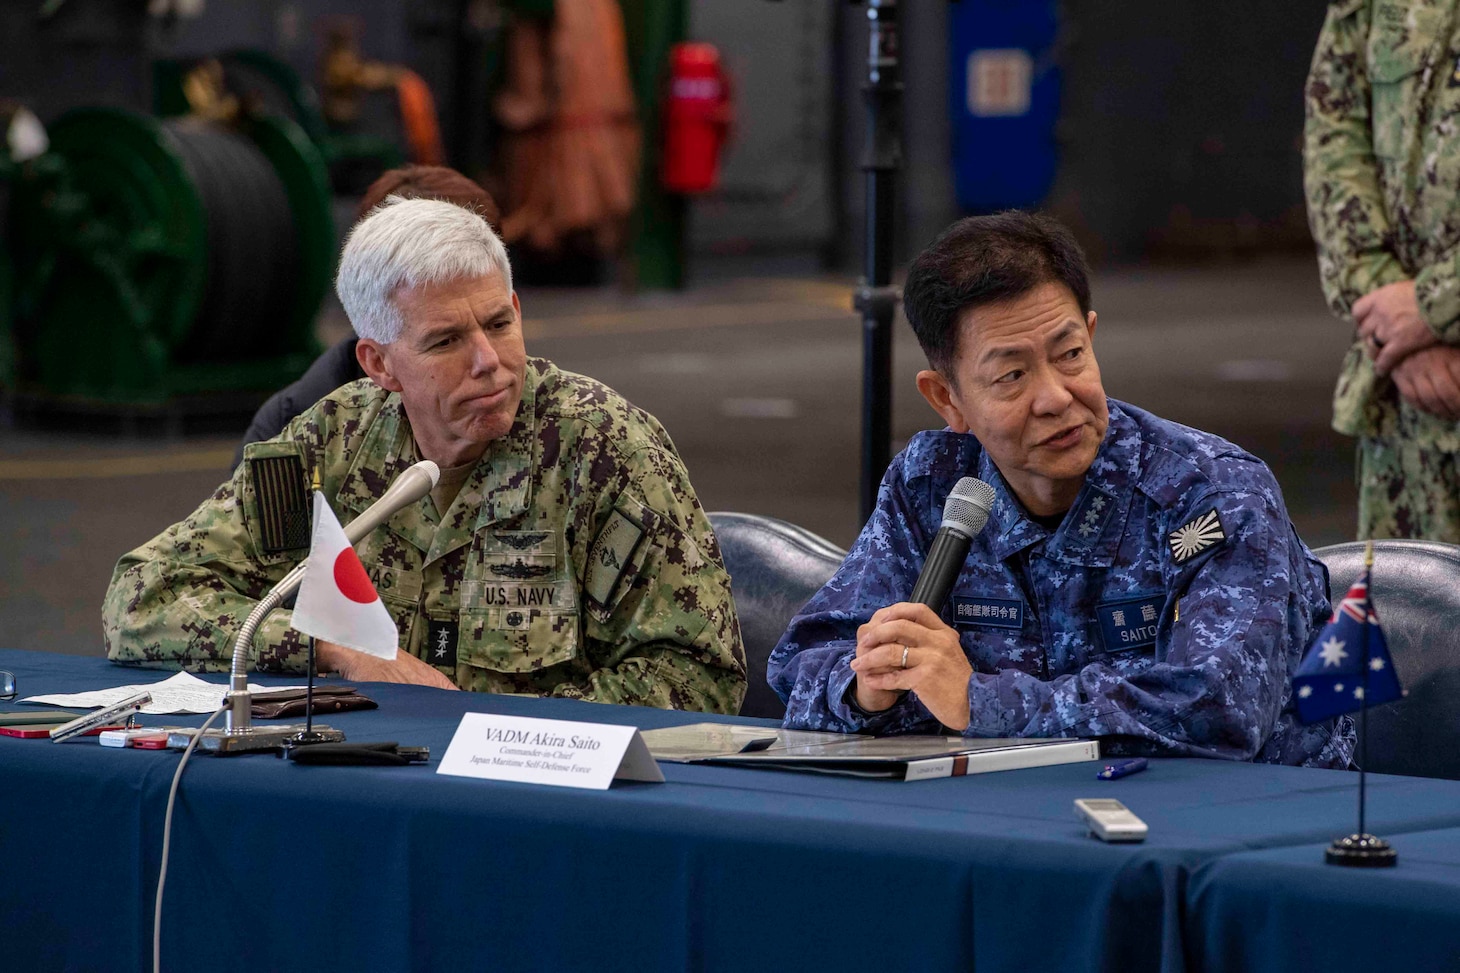 231111-N-TL932-1223 PHILIPPINE SEA (Nov. 11, 2023) Vice Adm. Karl Thomas, left, Commander, 7th Fleet and Vice Adm. Akira Saito, Commander in Chief, Self-Defense Fleet, Japan Maritime Self-Defense Force, conduct a multilateral press conference aboard Nimitz-class aircraft carrier USS Carl Vinson (CVN 70) as part of Annual Exercise (ANNUALEX) 2023. ANNUALEX is a multilateral exercise conducted by naval elements of the Royal Australian, Royal Canadian, Japan Maritime Self-Defense Force, and U.S. navies to demonstrate naval interoperability and a joint commitment to a free and open Indo-Pacific. Vinson, flagship of Carrier Strike Group ONE, is deployed to the U.S. 7th Fleet area of operations in support of a free and open Indo-Pacific. (U.S. Navy photo by Mass Communication Specialist 3rd Class Joshua Sapien)